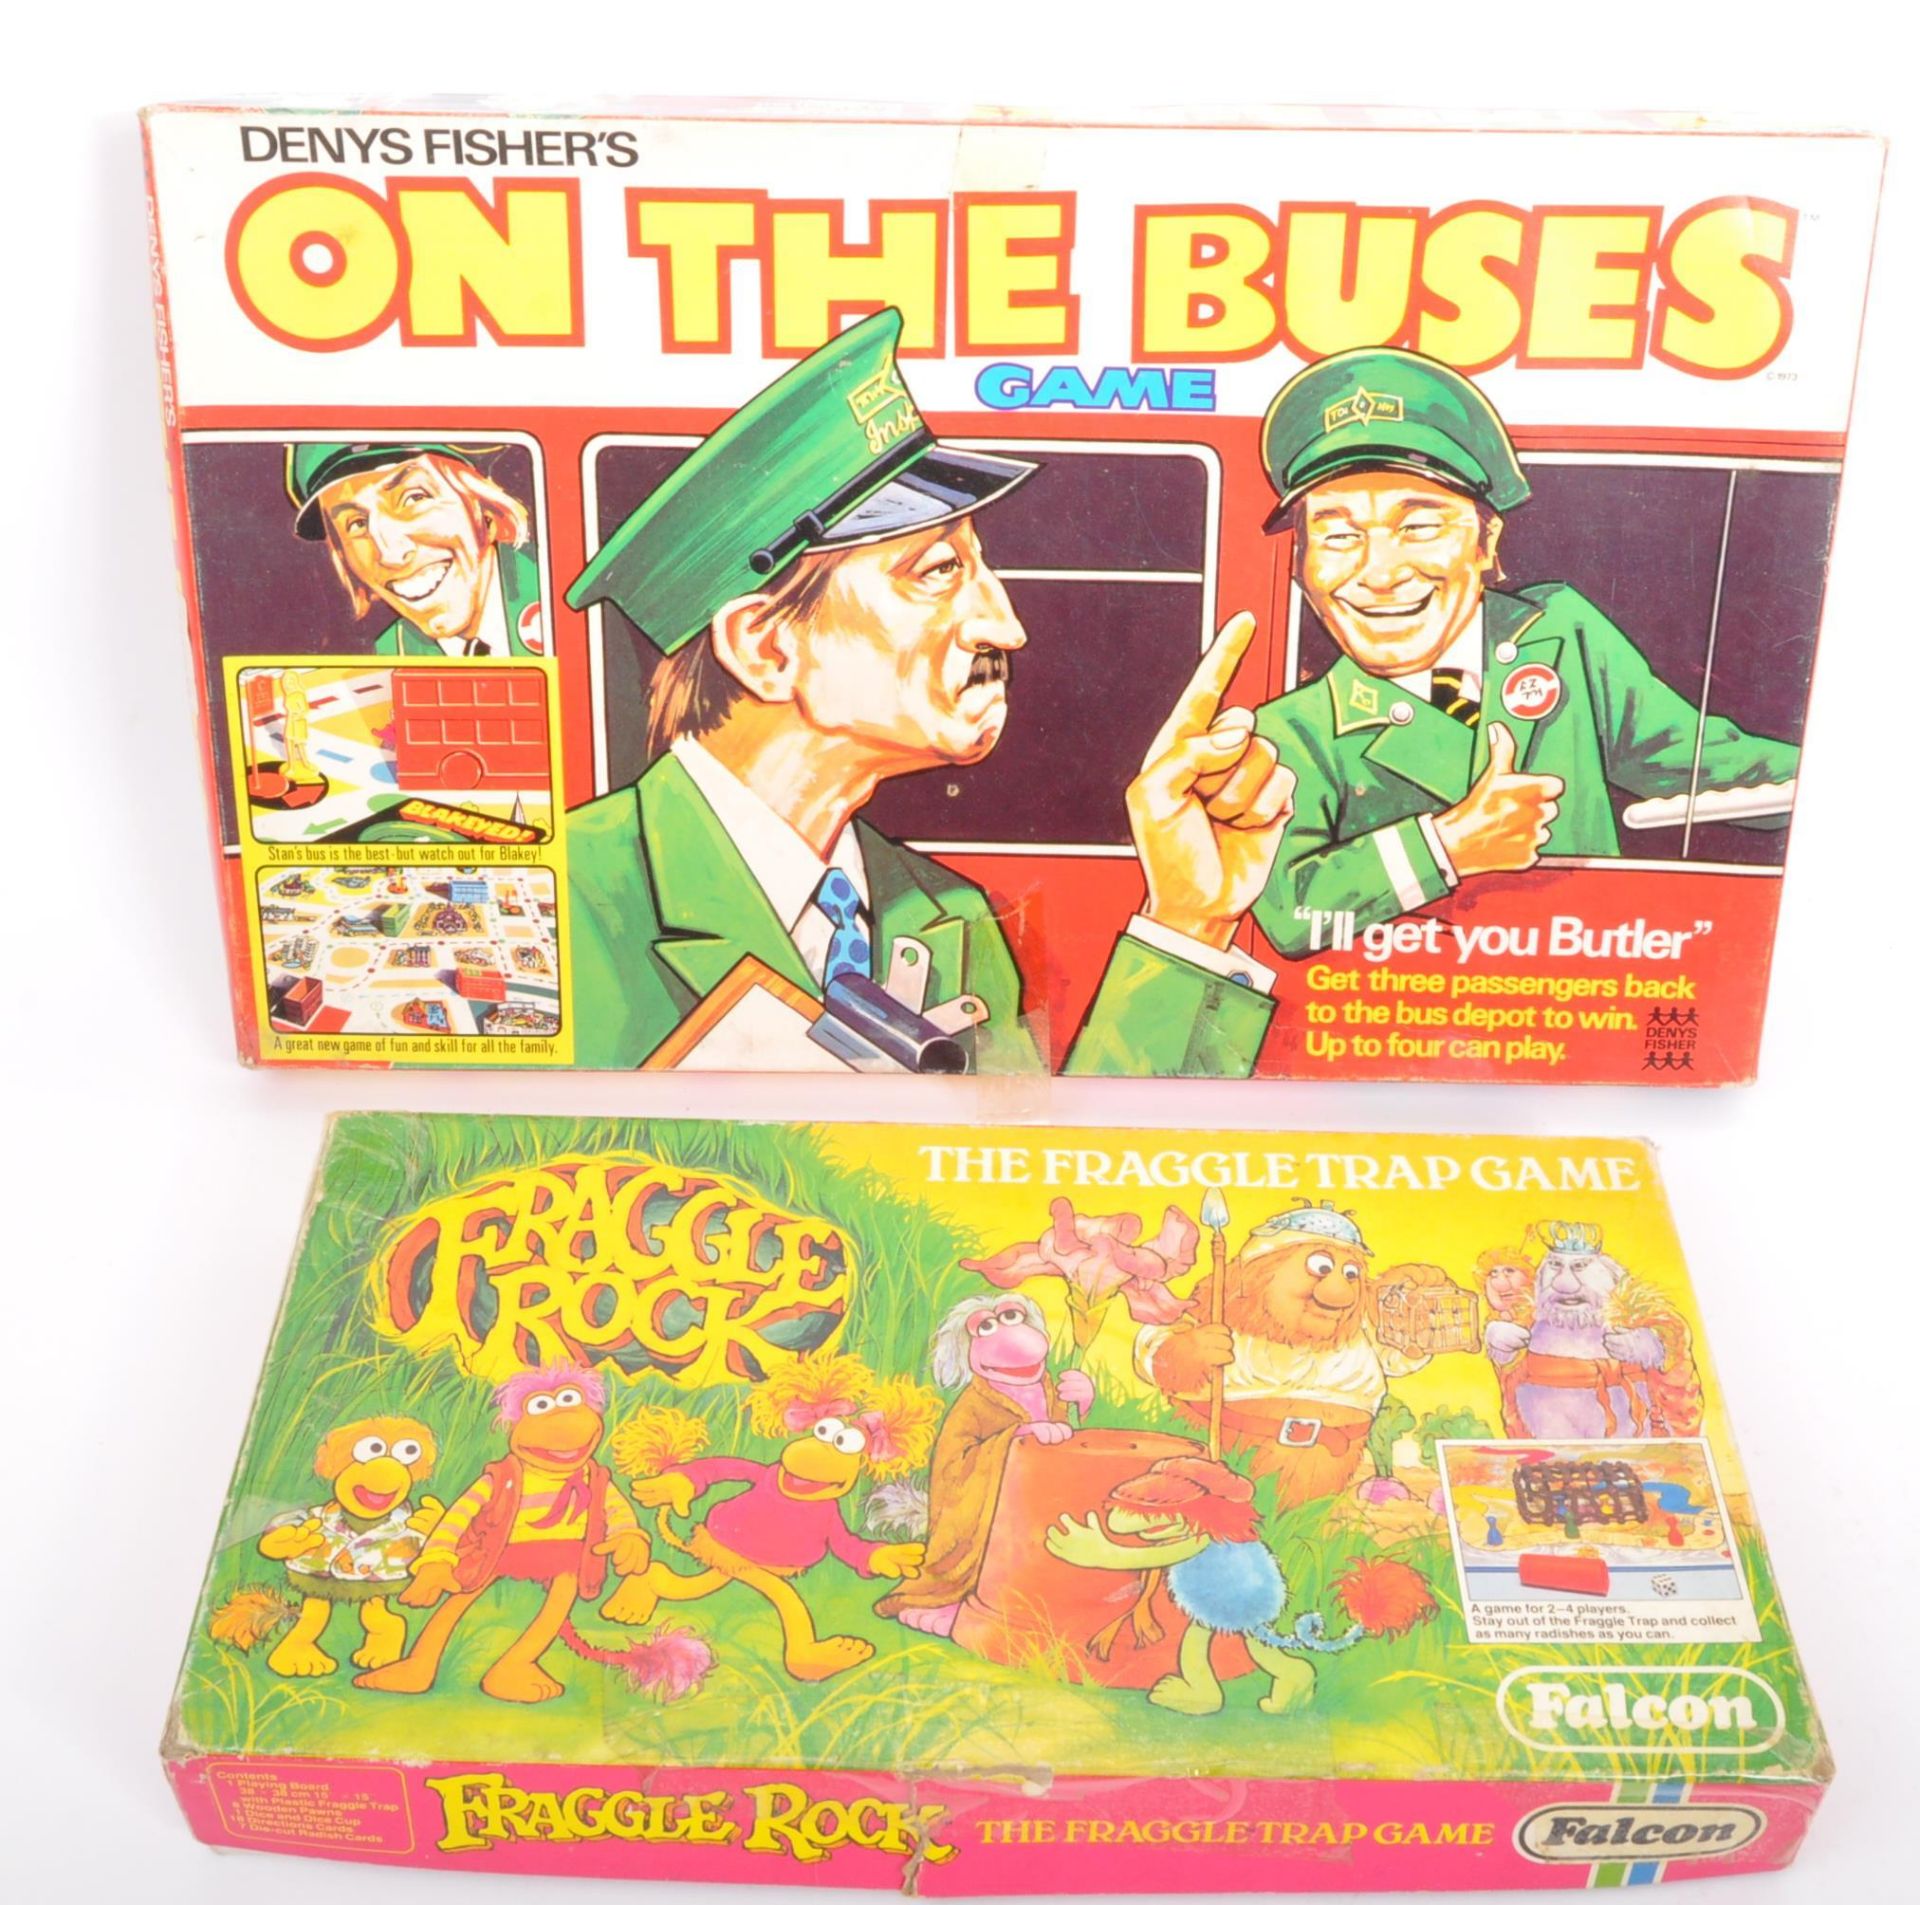 COLLECTION OF VINTAGE TV & FILM RELATED BOARD GAMES & PUZZLES - Image 4 of 5